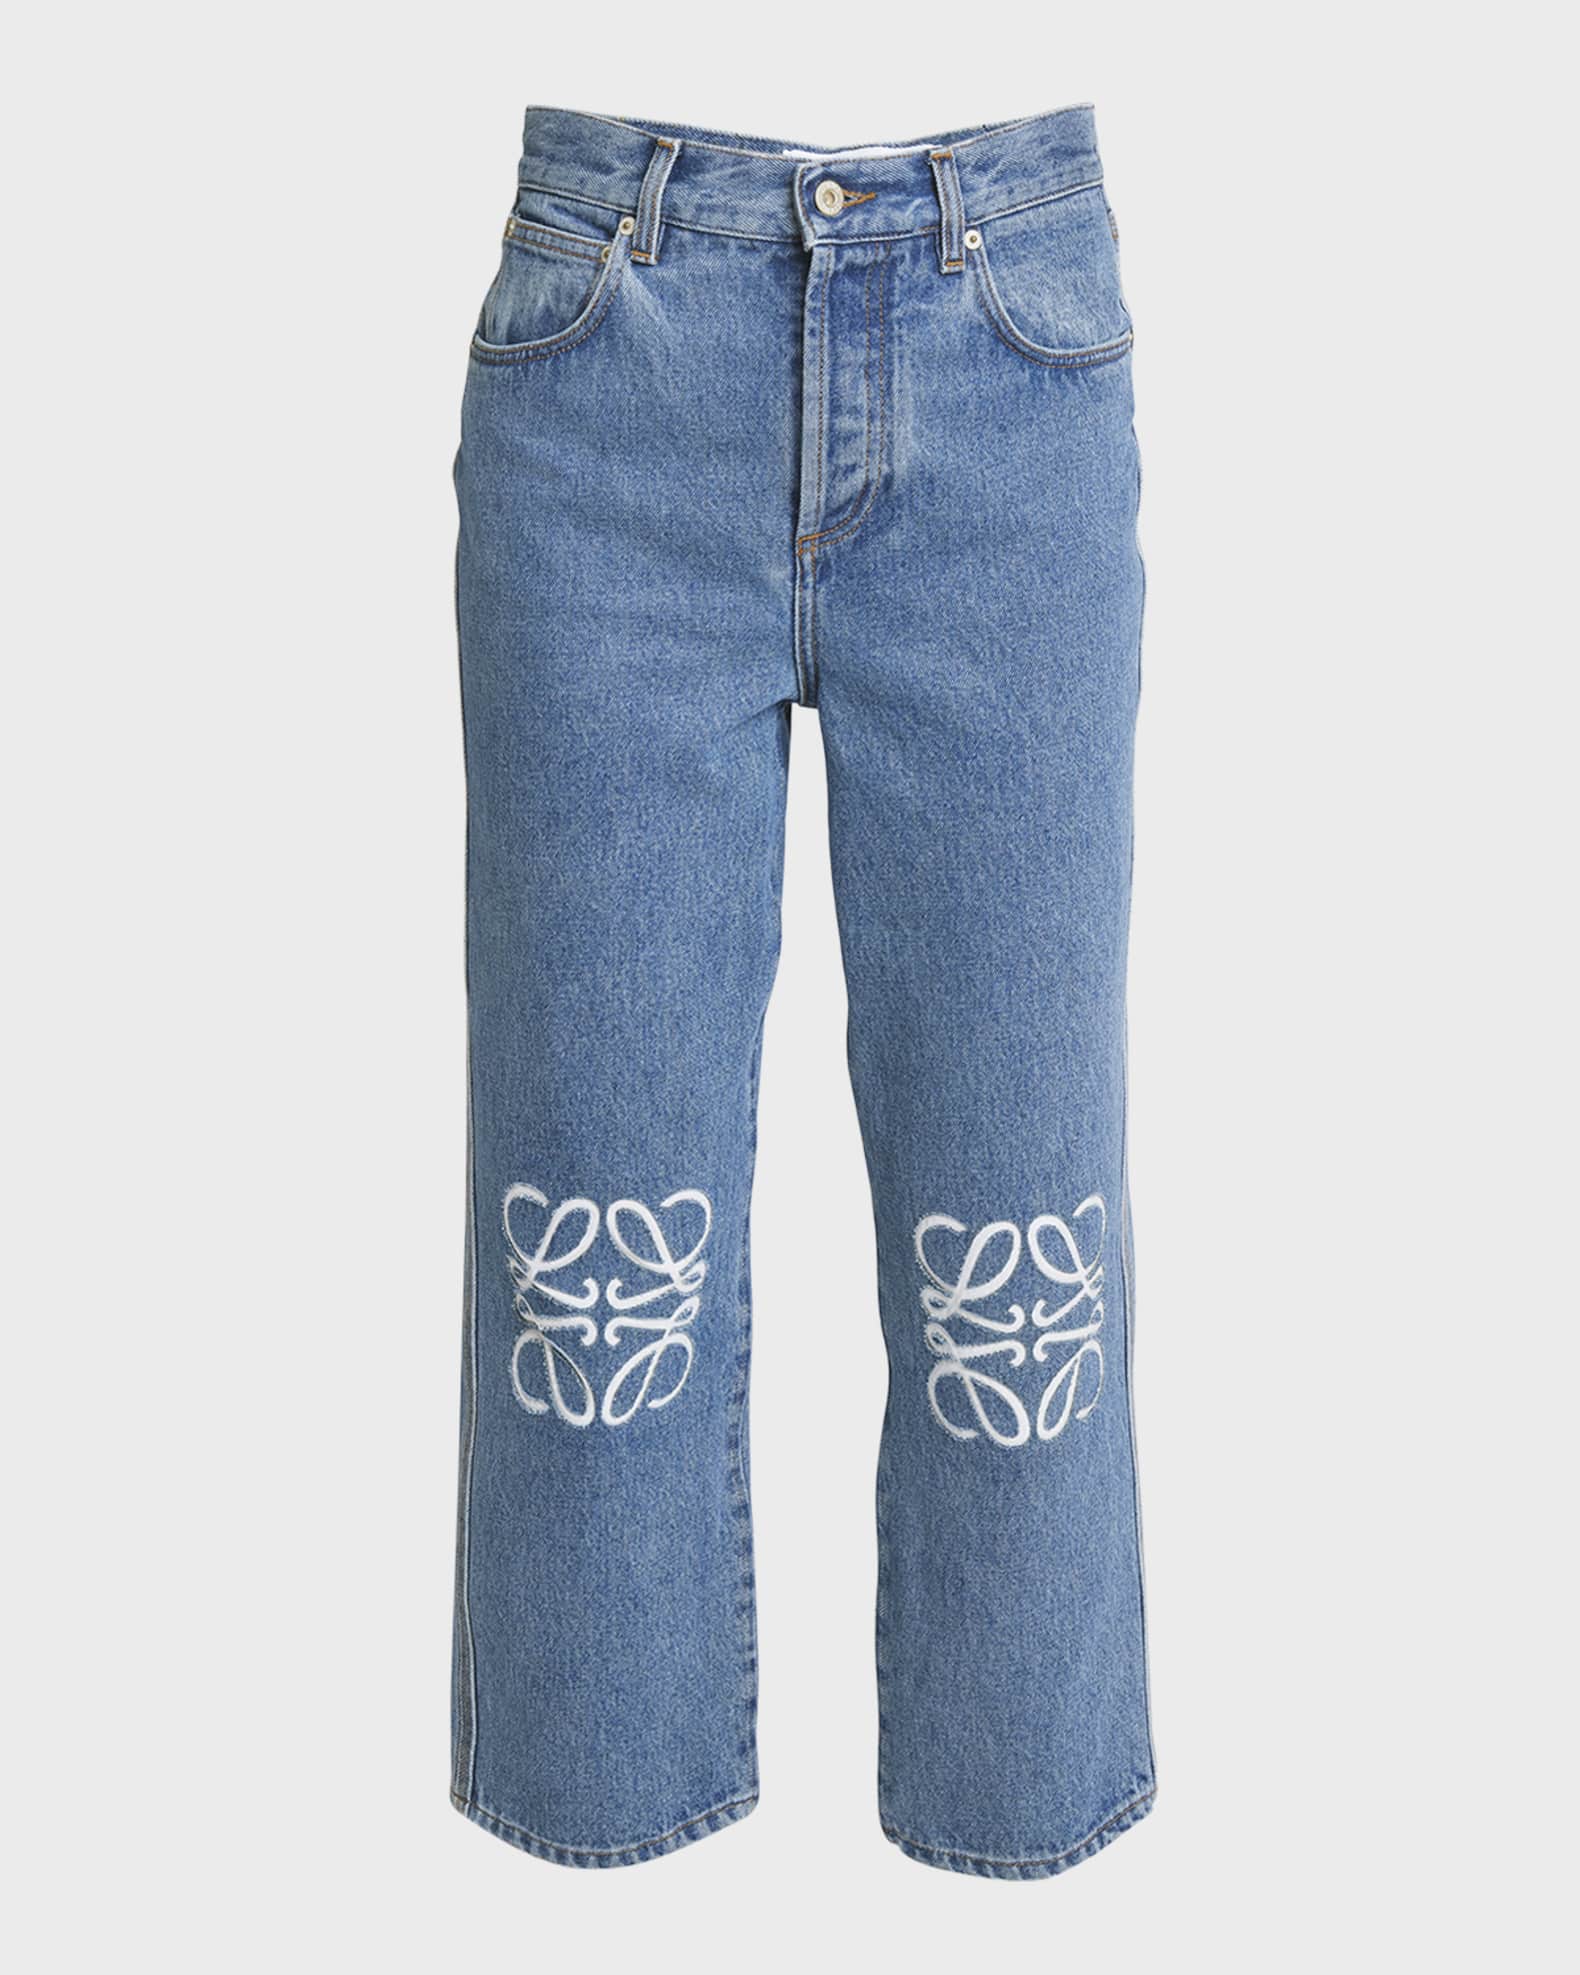 Loewe Cropped Jeans with Anagram Knee Detail | Neiman Marcus